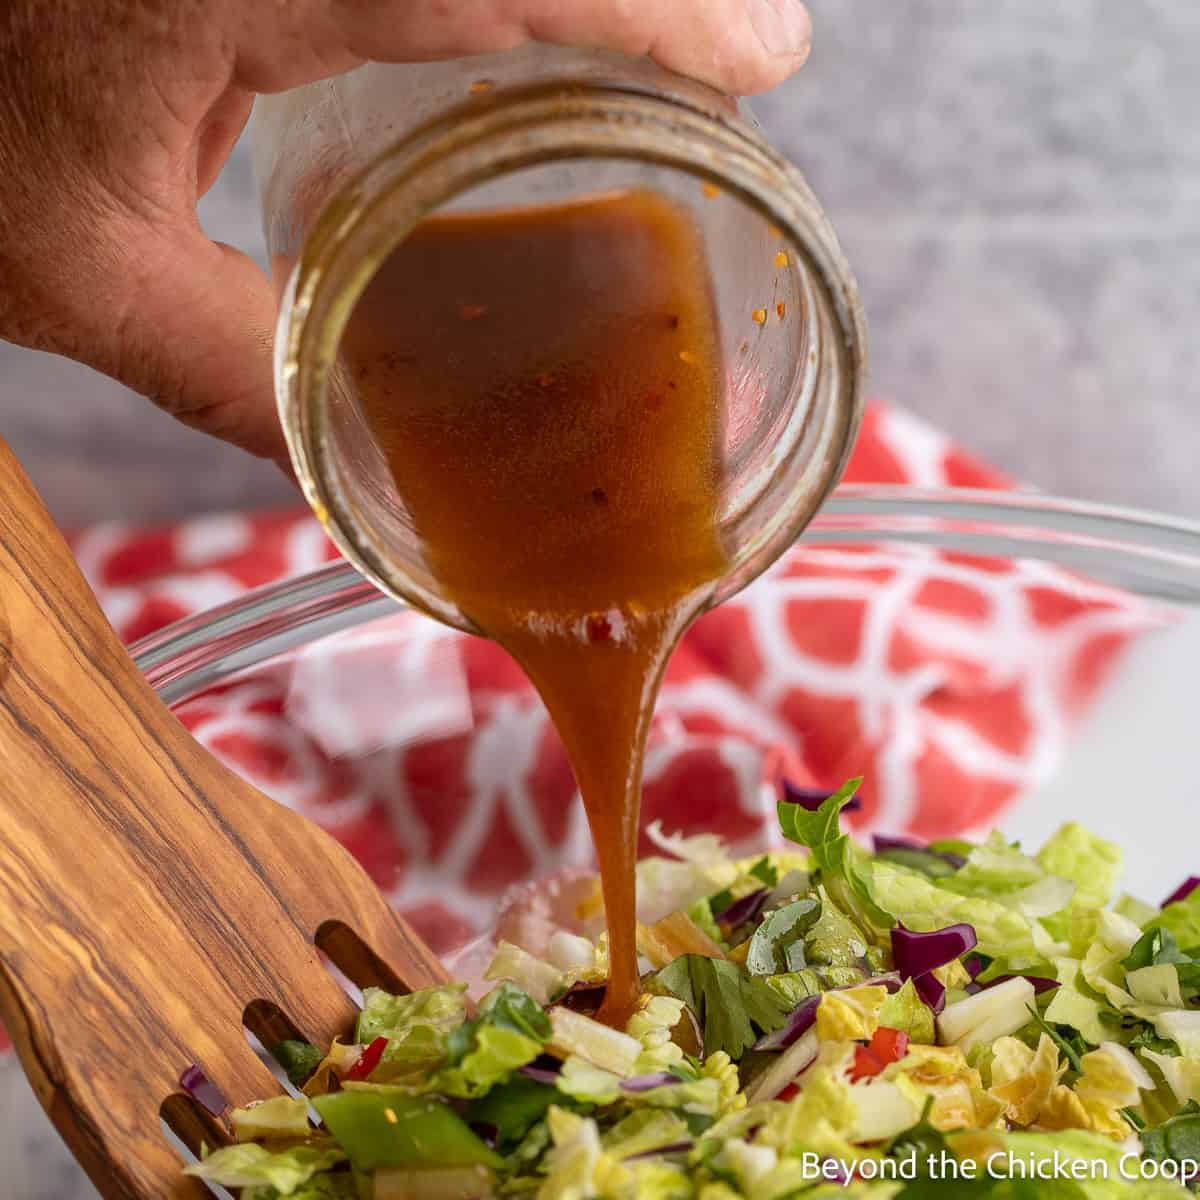 Pouring a salad dressing over a salad.